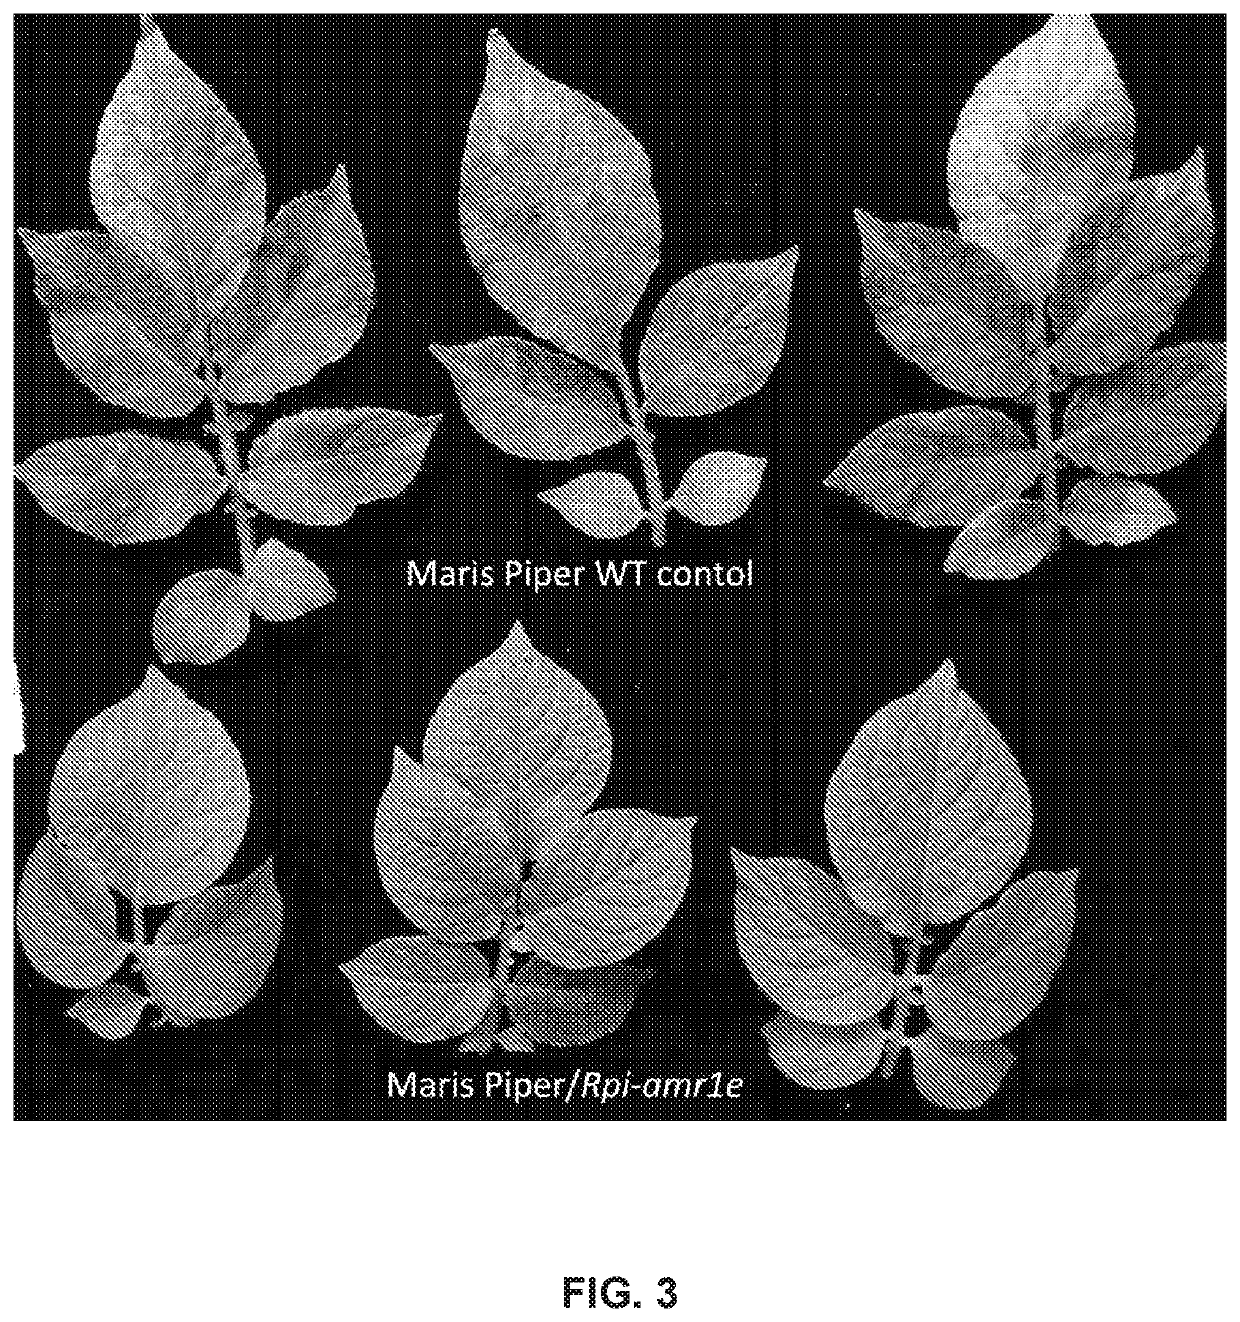 Late blight resistance genes and methods of use